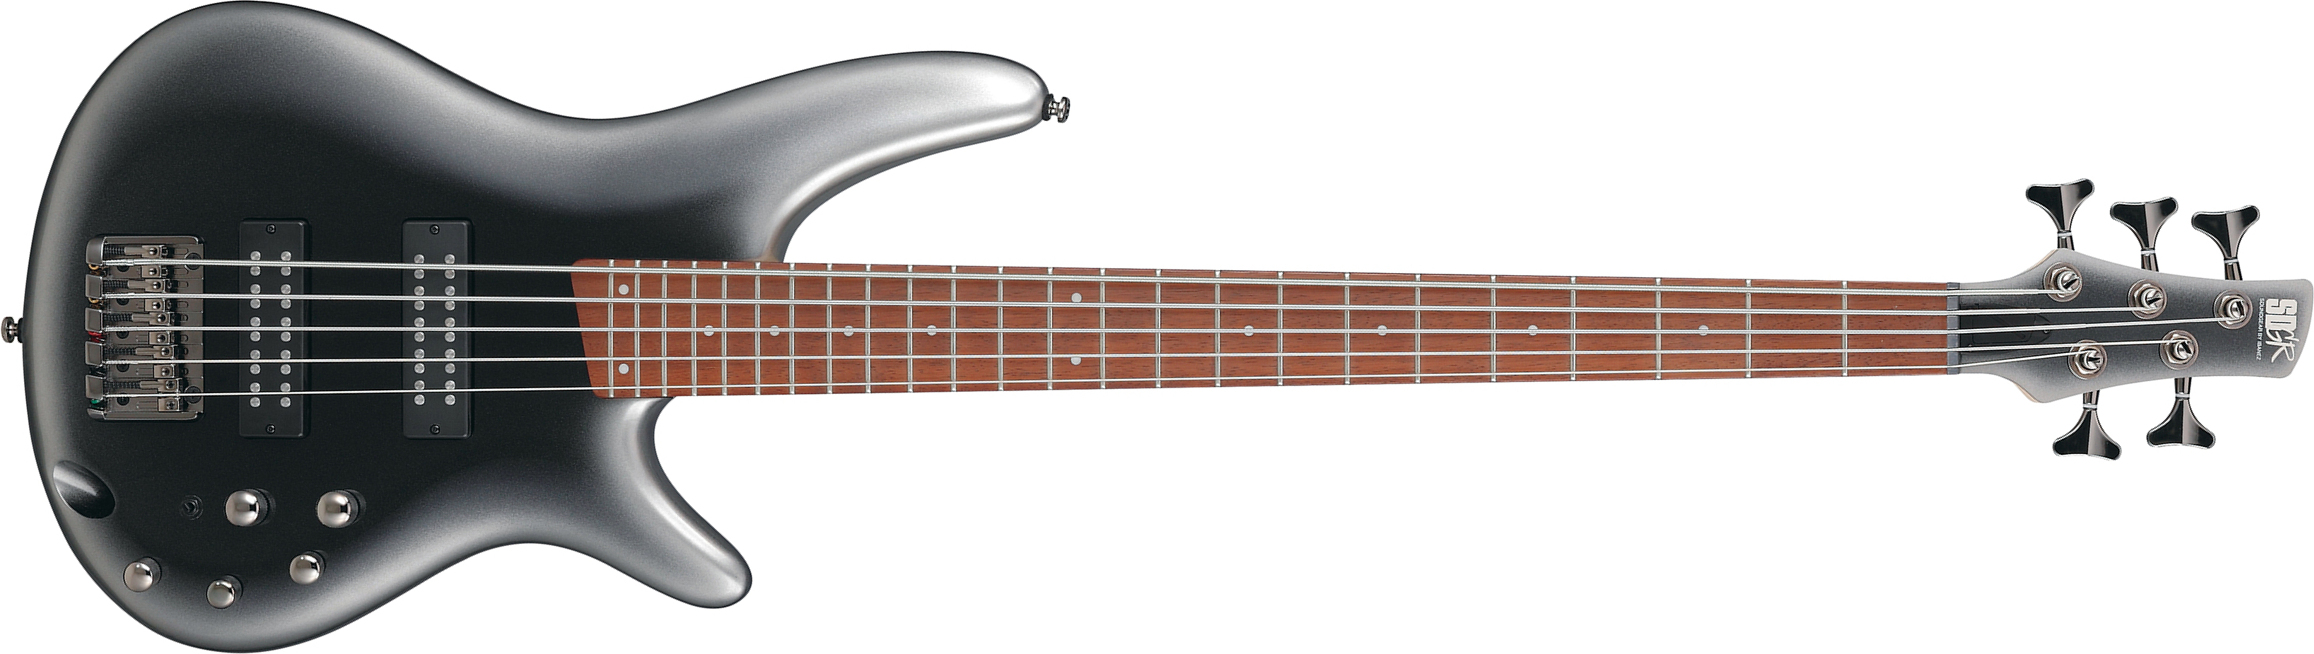 Ibanez Sr305e Mgb Standard 5c Active Jat - Midnight Gray Burst - Solid body electric bass - Main picture